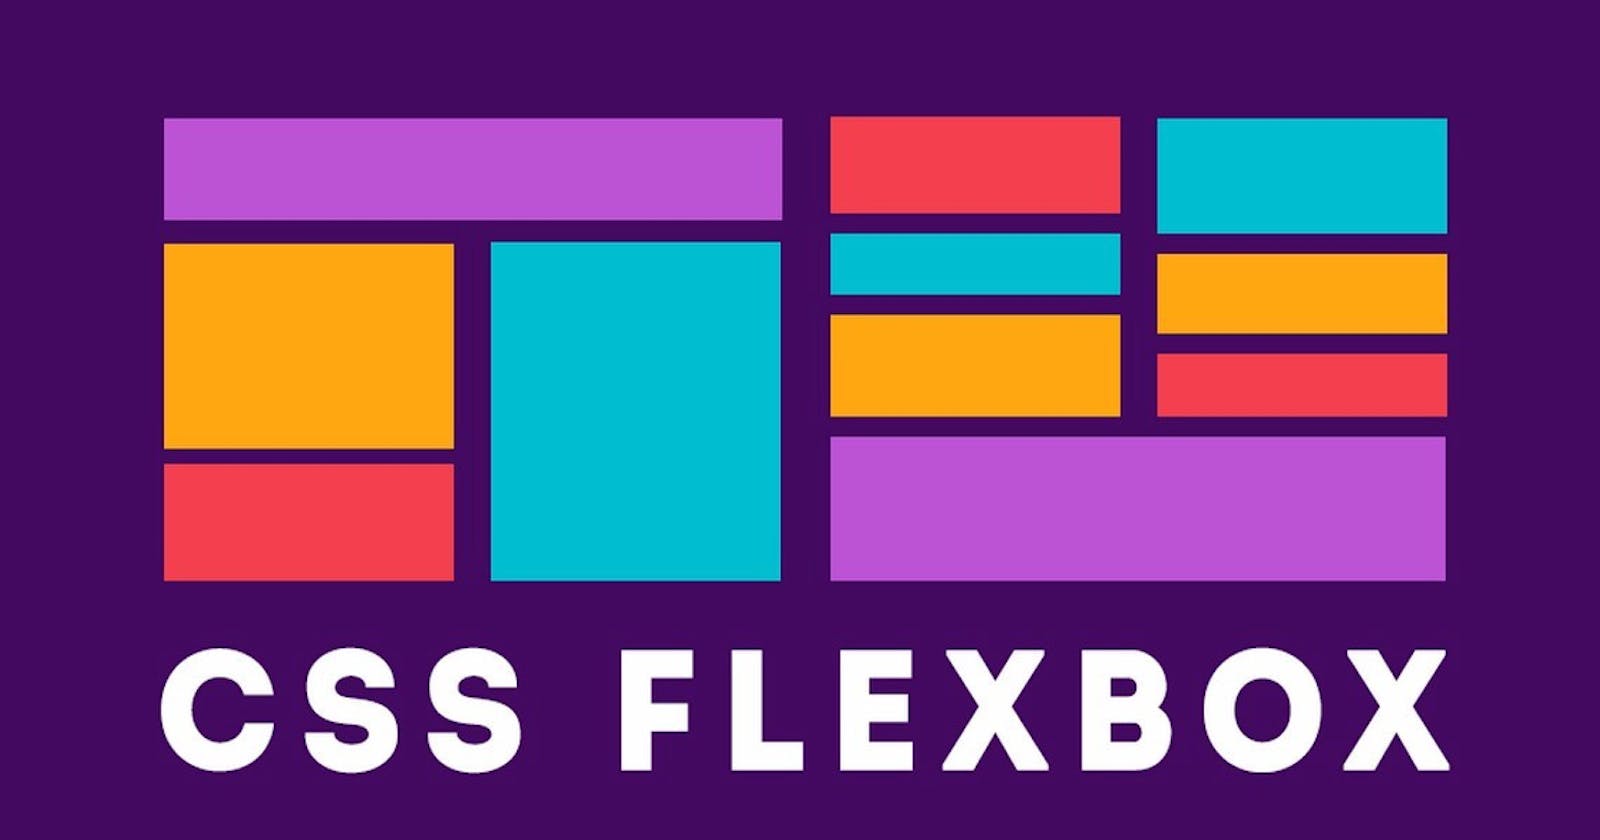 Simple steps to Flexbox Layout in CSS(Cascading Style Sheets)